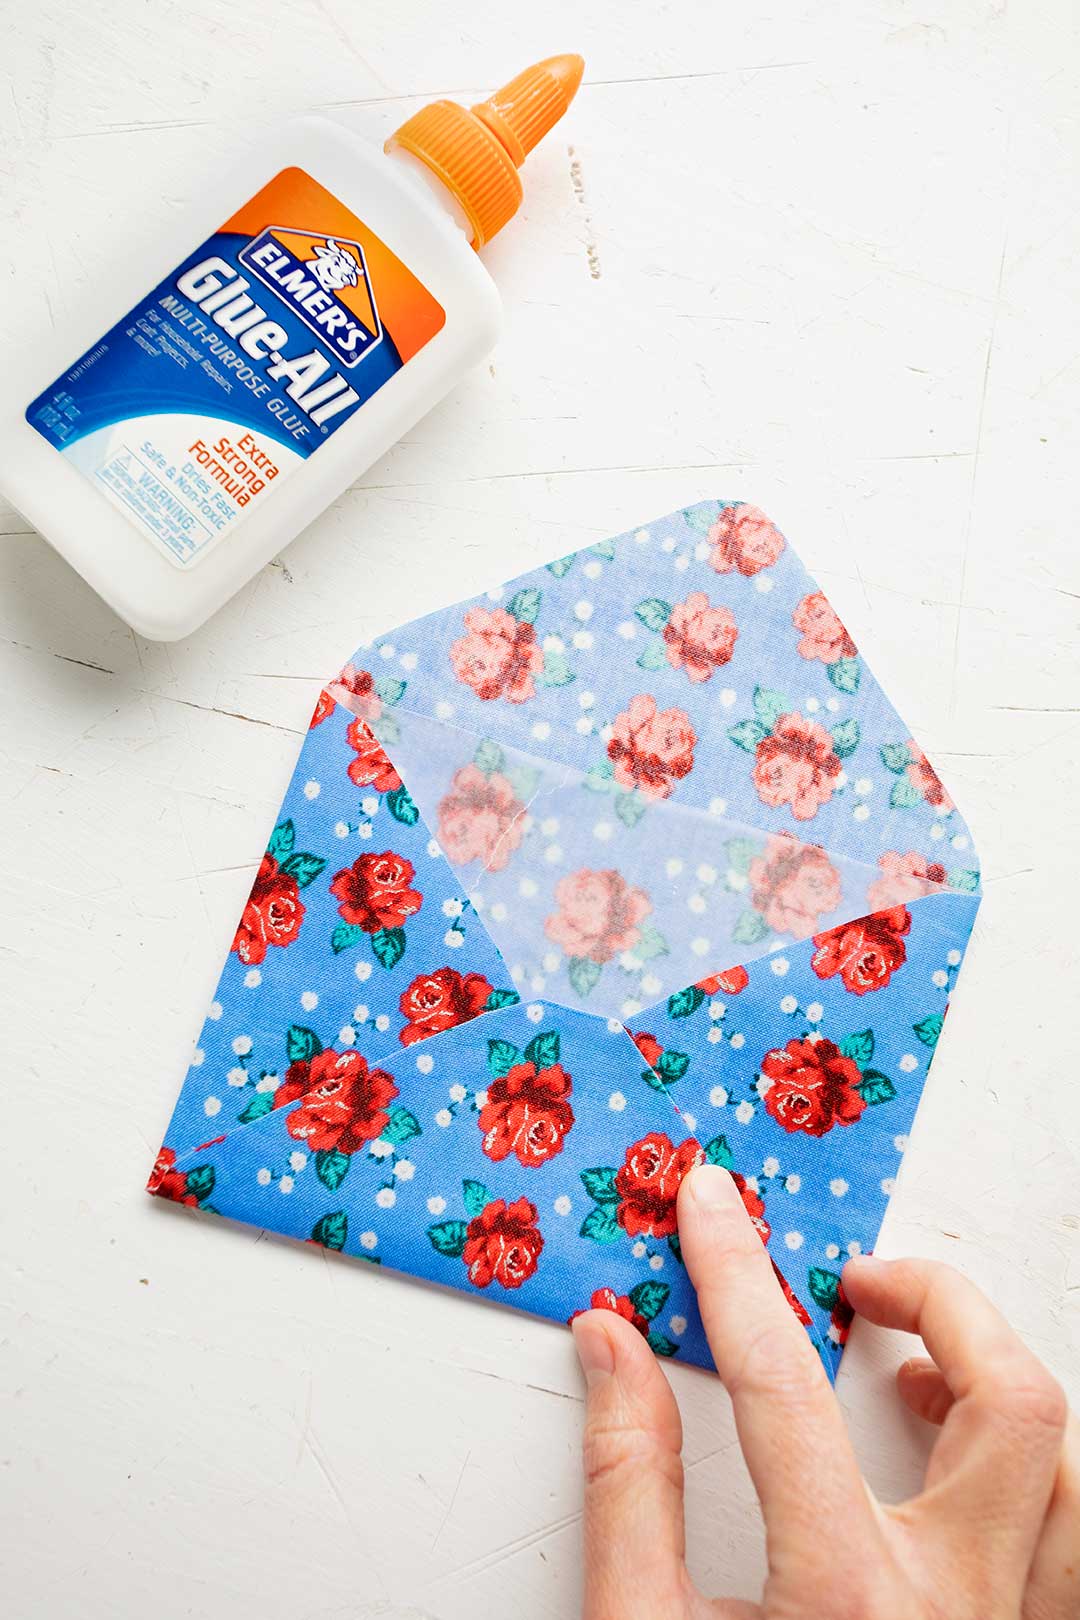 Blue floral fabric envelope opened with a bottle of Elmers glue on white background.